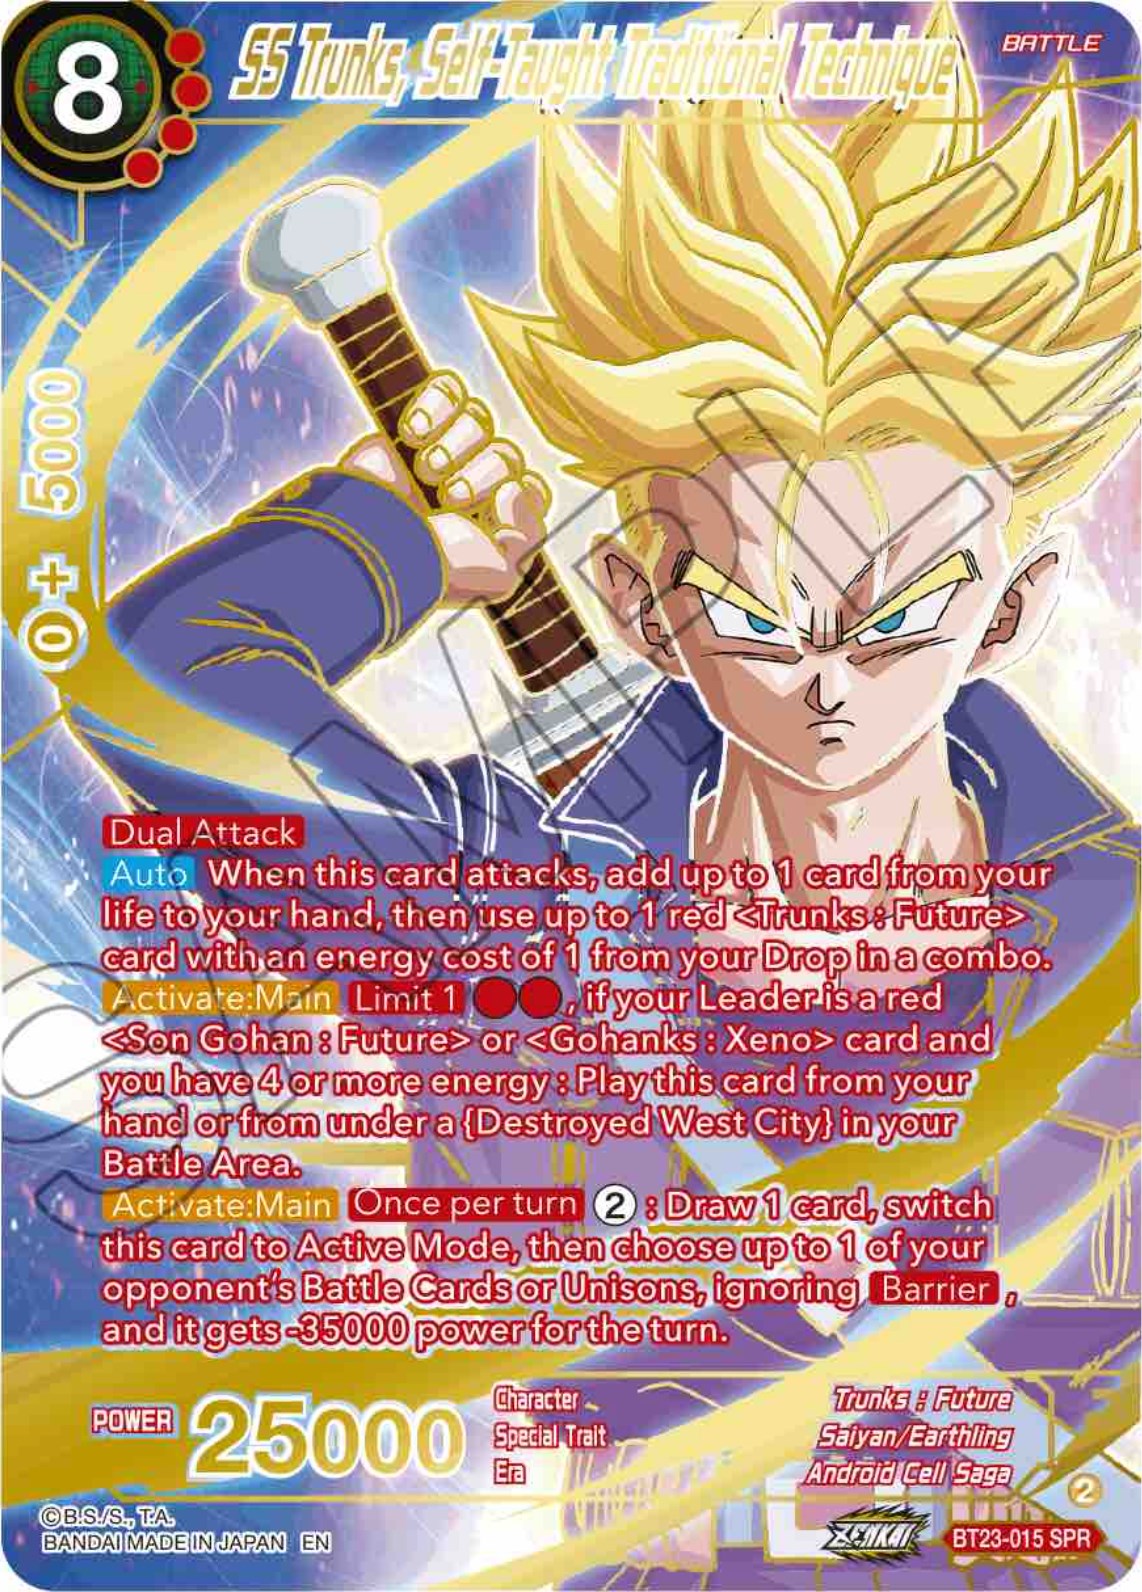 SS Trunks, Self-Taught Traditional Technique (SPR) (BT23-015) [Perfect Combination] | Amazing Games TCG